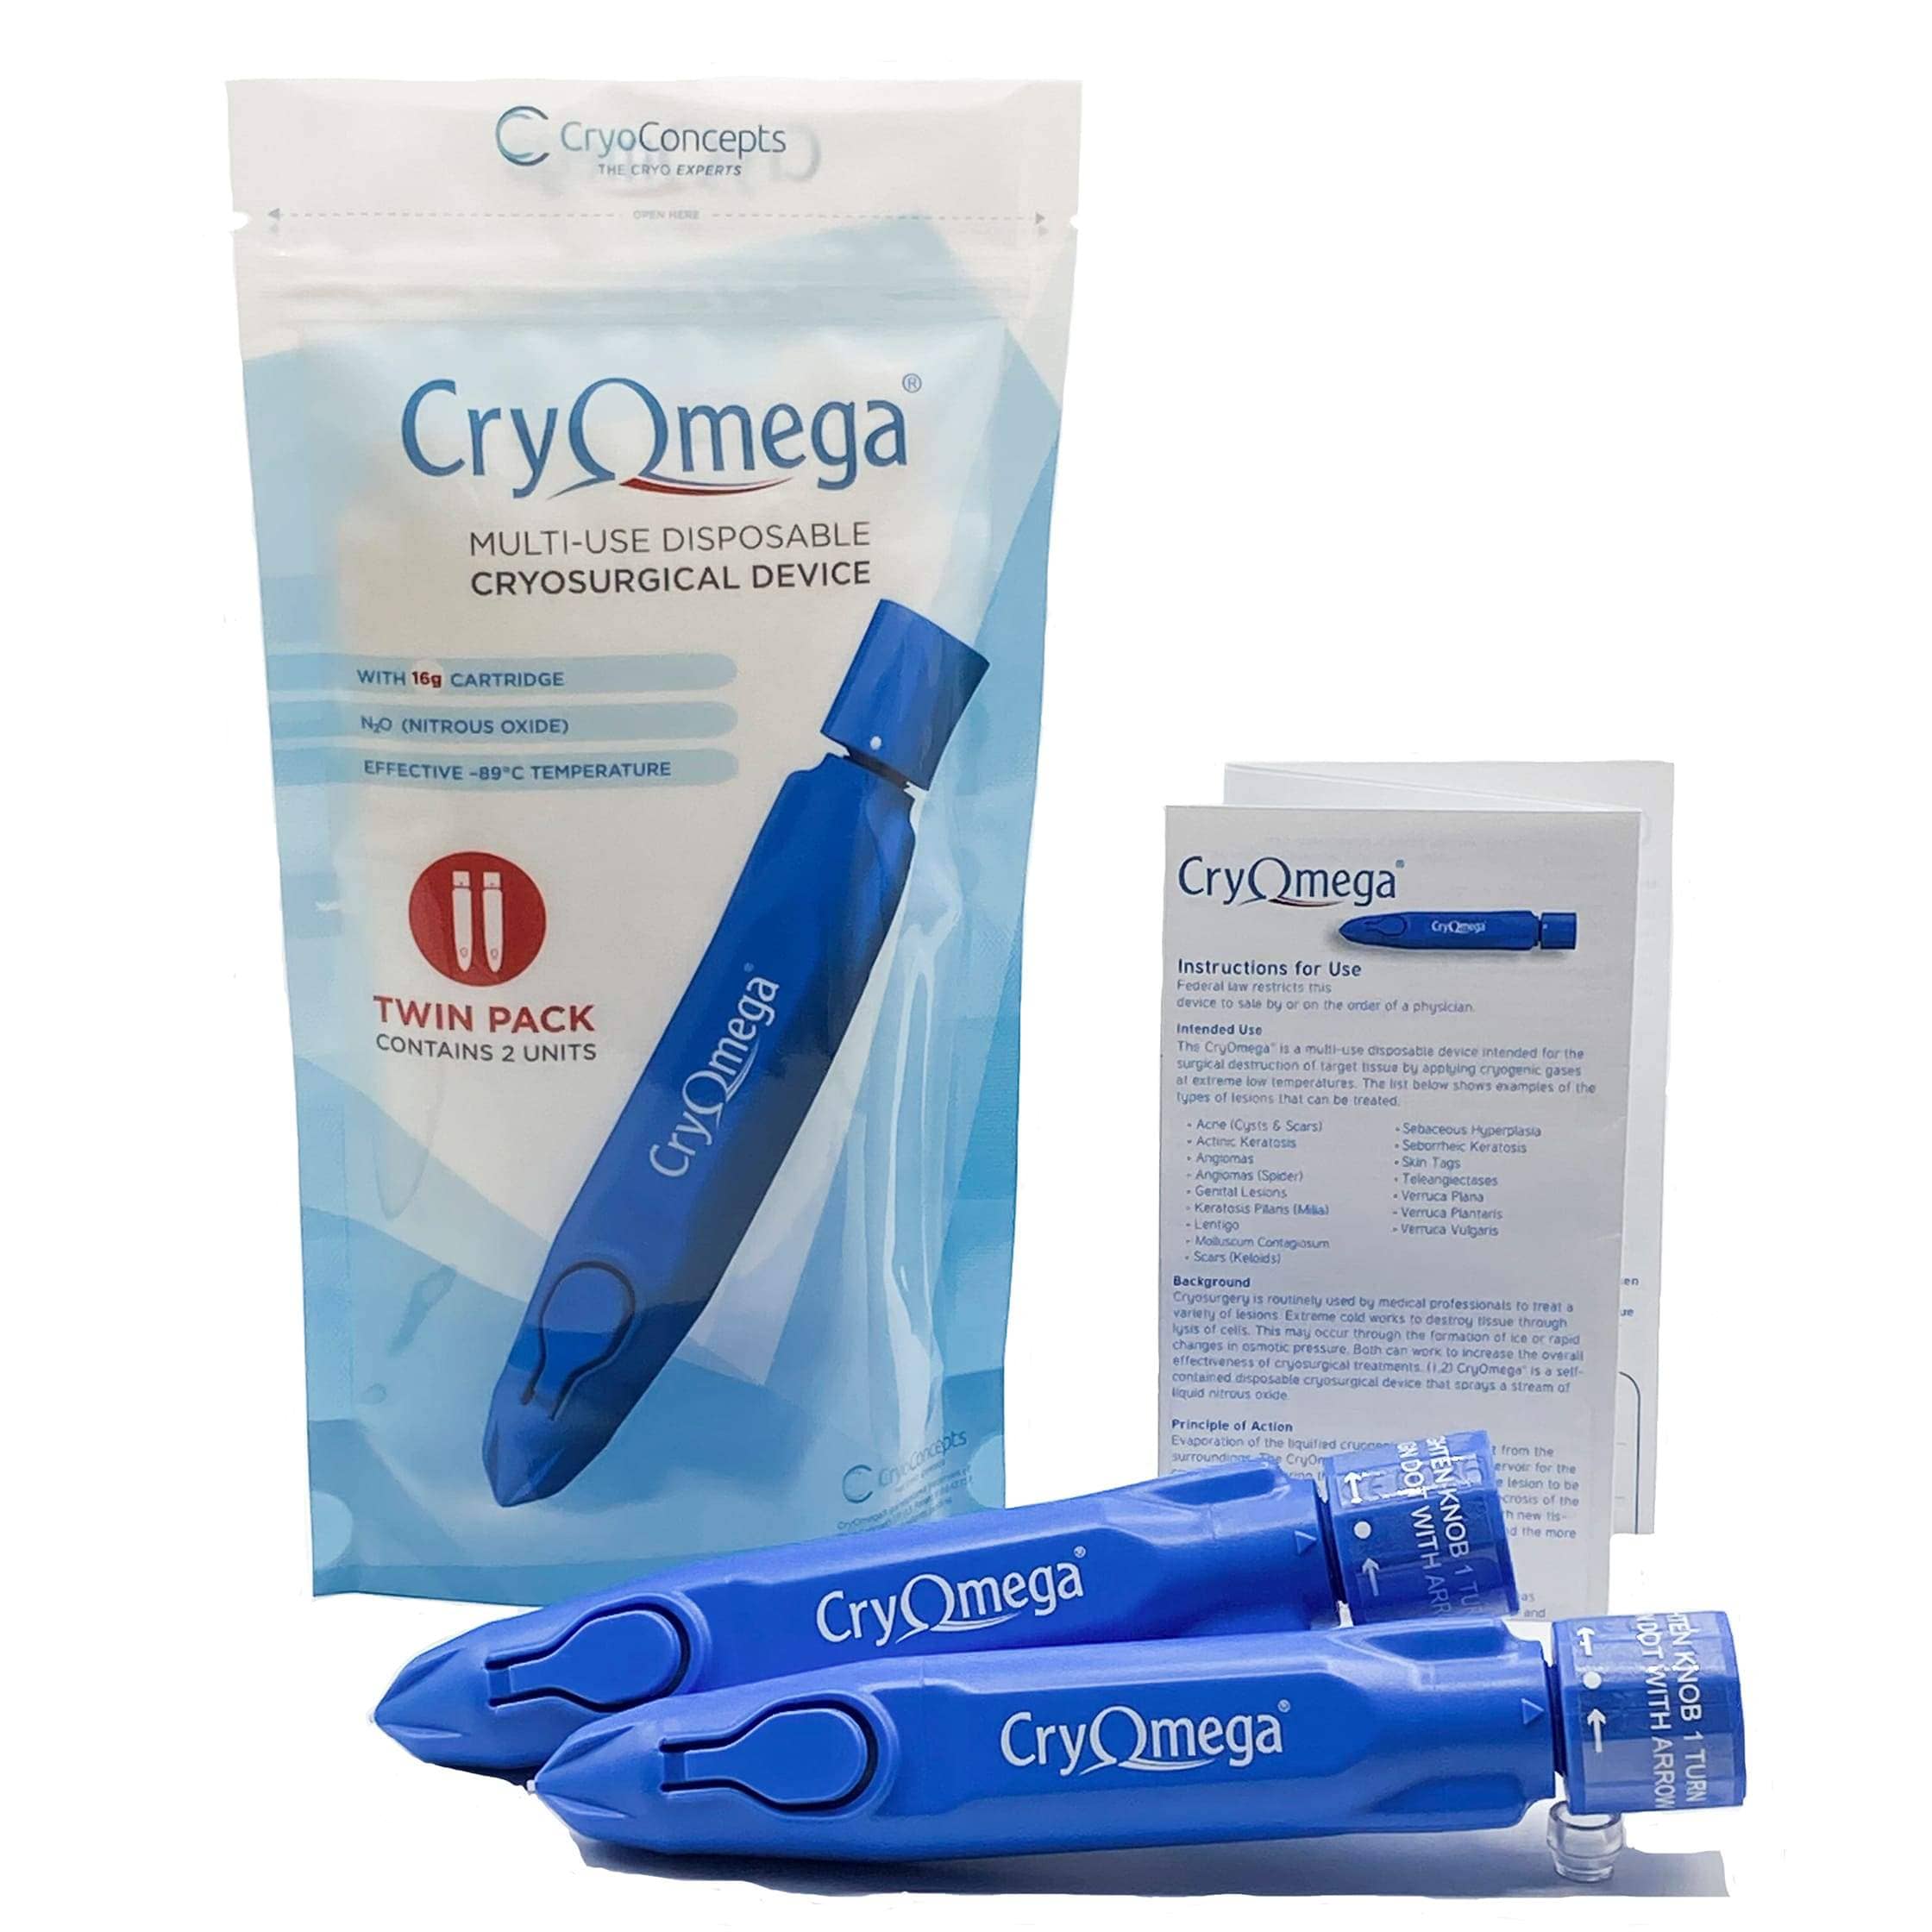 CryoConcepts CryOmega Multi-Use Disposable Cryosurgical Device - Twin Pack